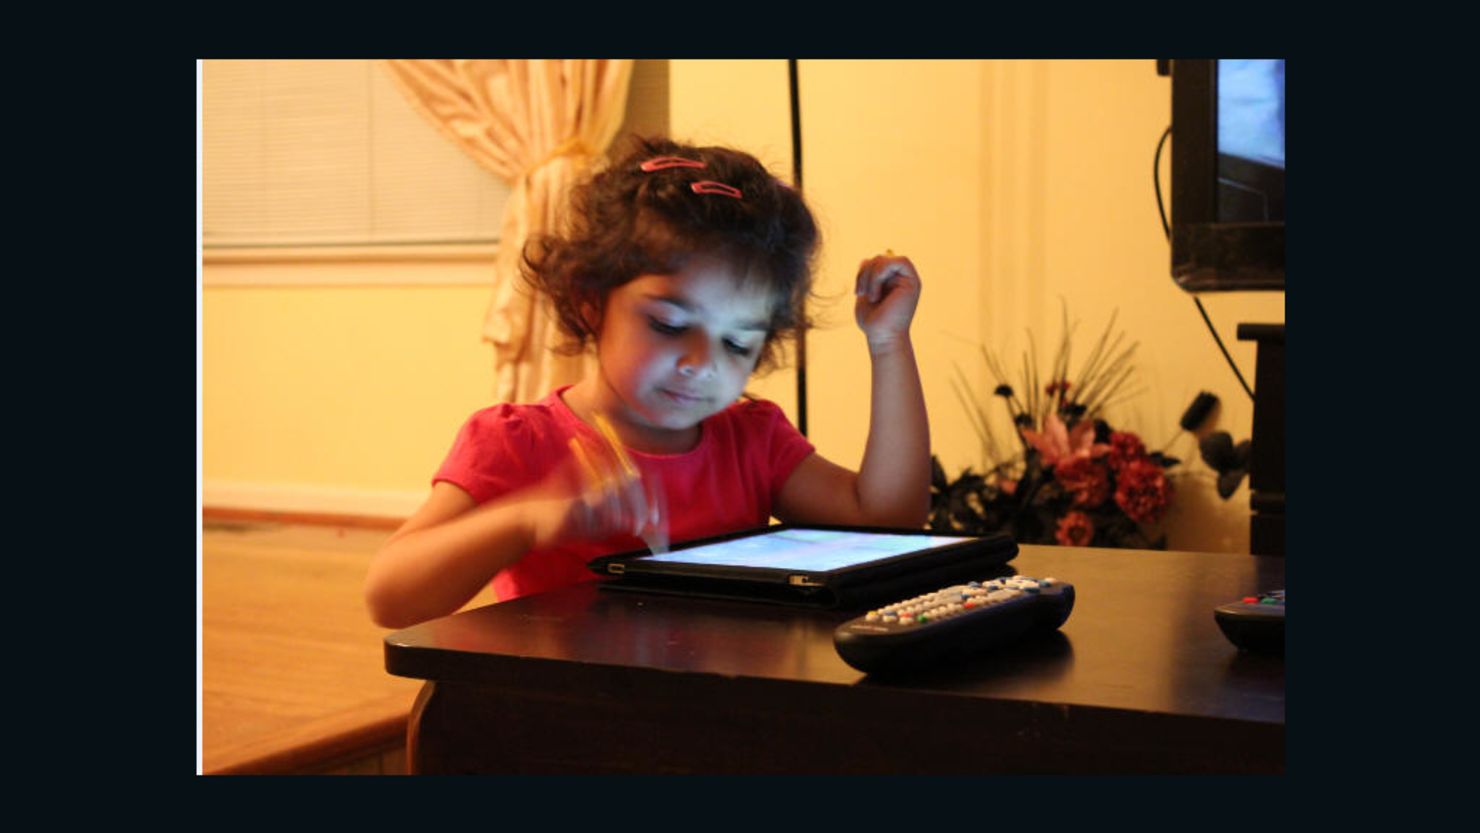 Sharia Siddiqui uses an iPad to help her communicate. Her father says it's "given her a sense of control she never had."